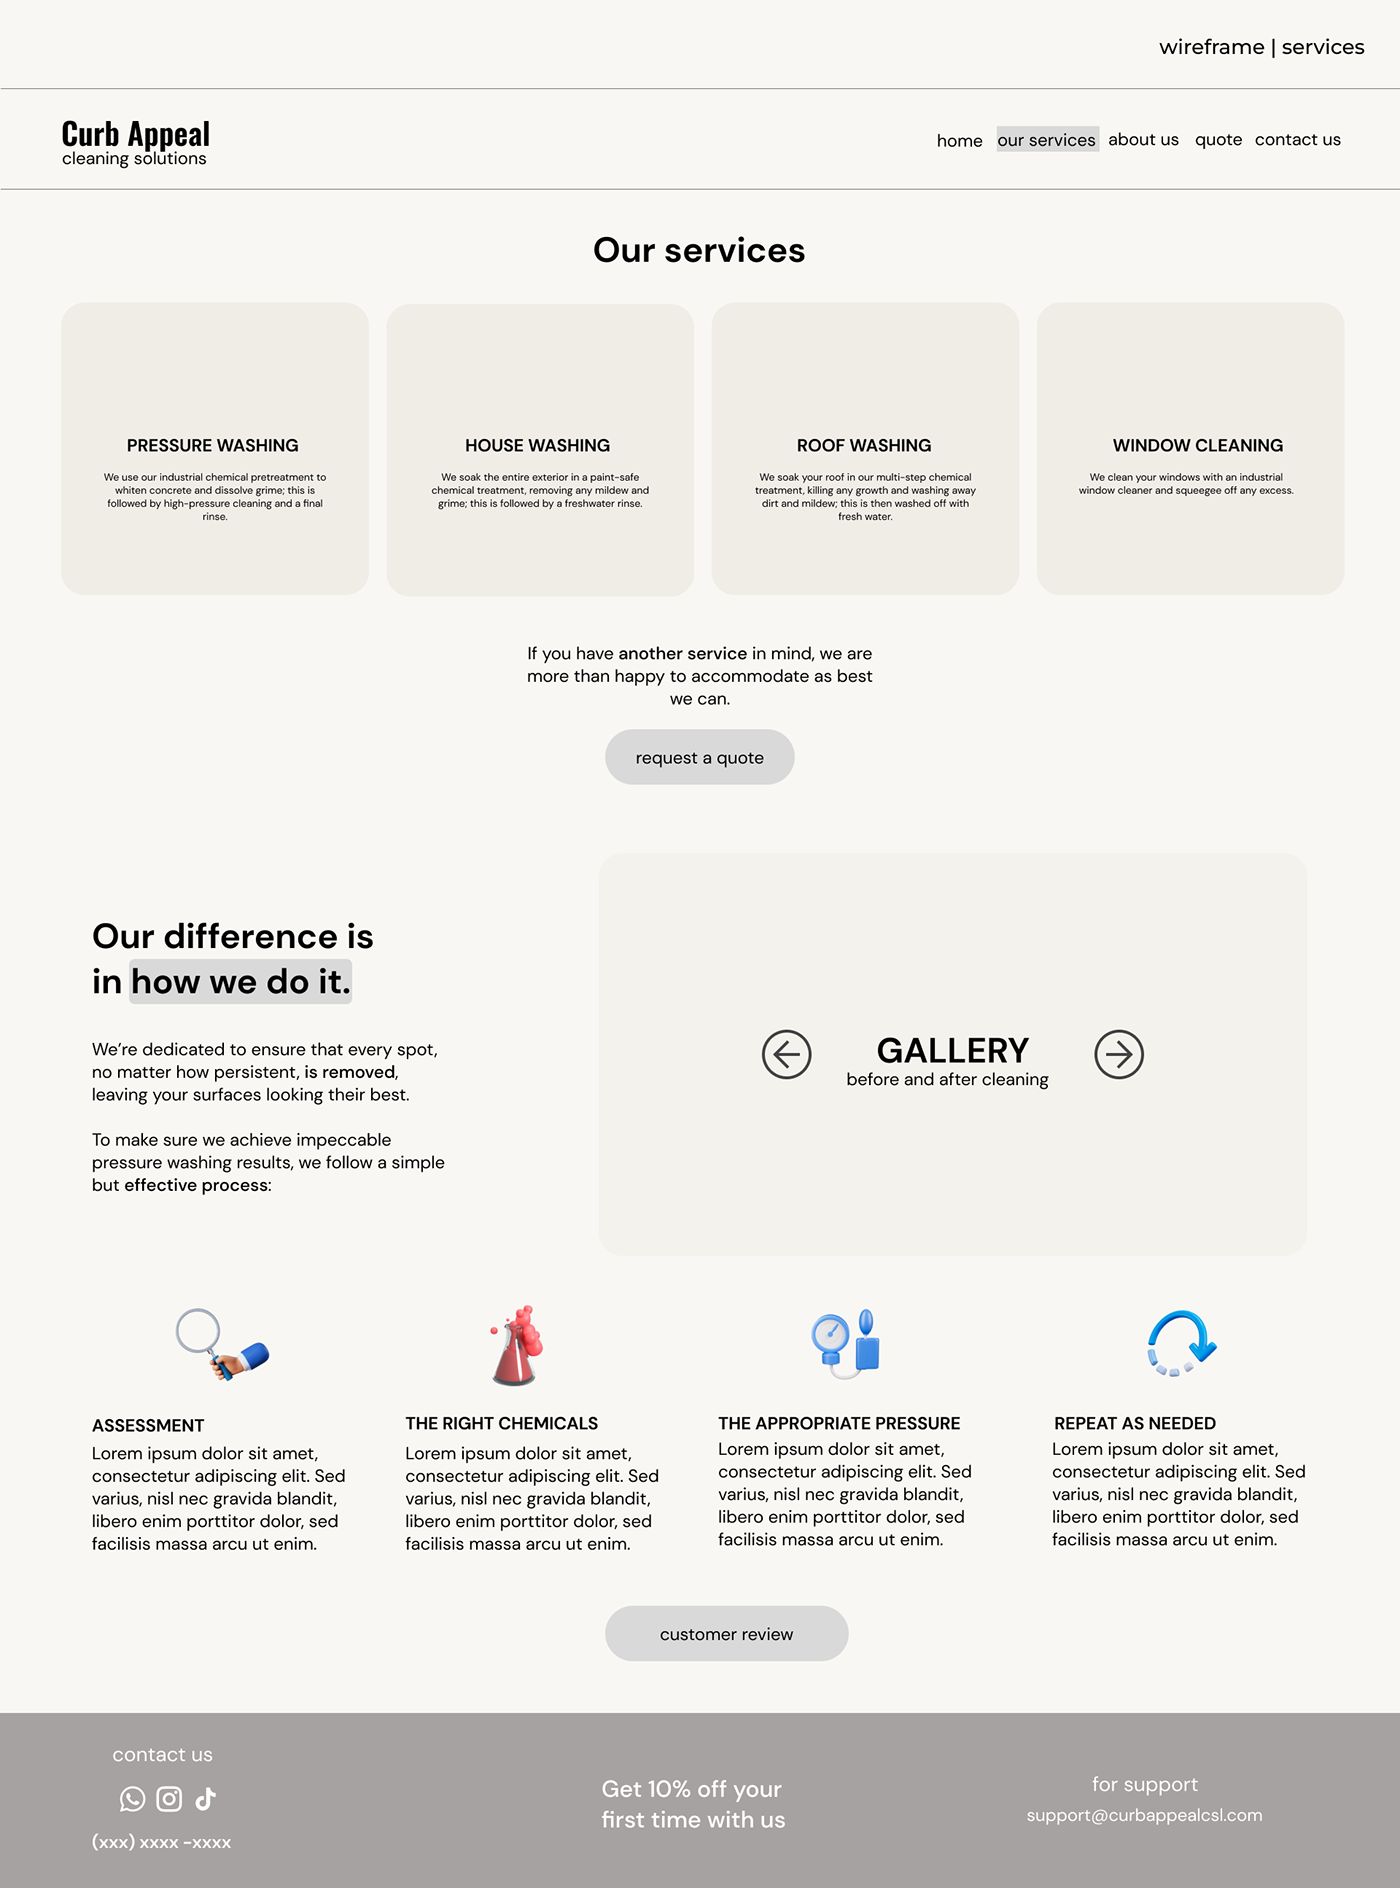 wireframe ux Website Figma cleaning services branding  strategic design